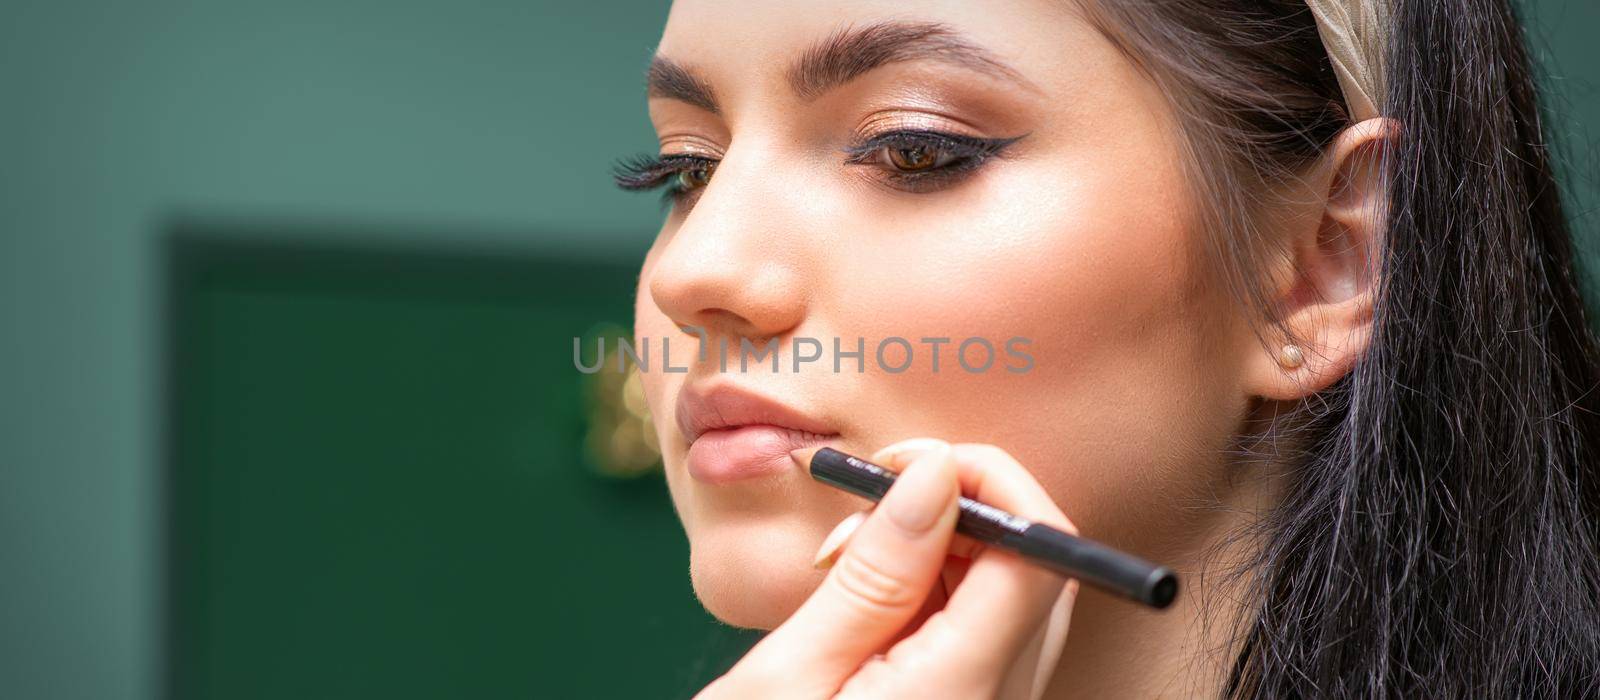 Makeup professional artist or cosmetologist is painting contour lips of a young woman with a pencil close up